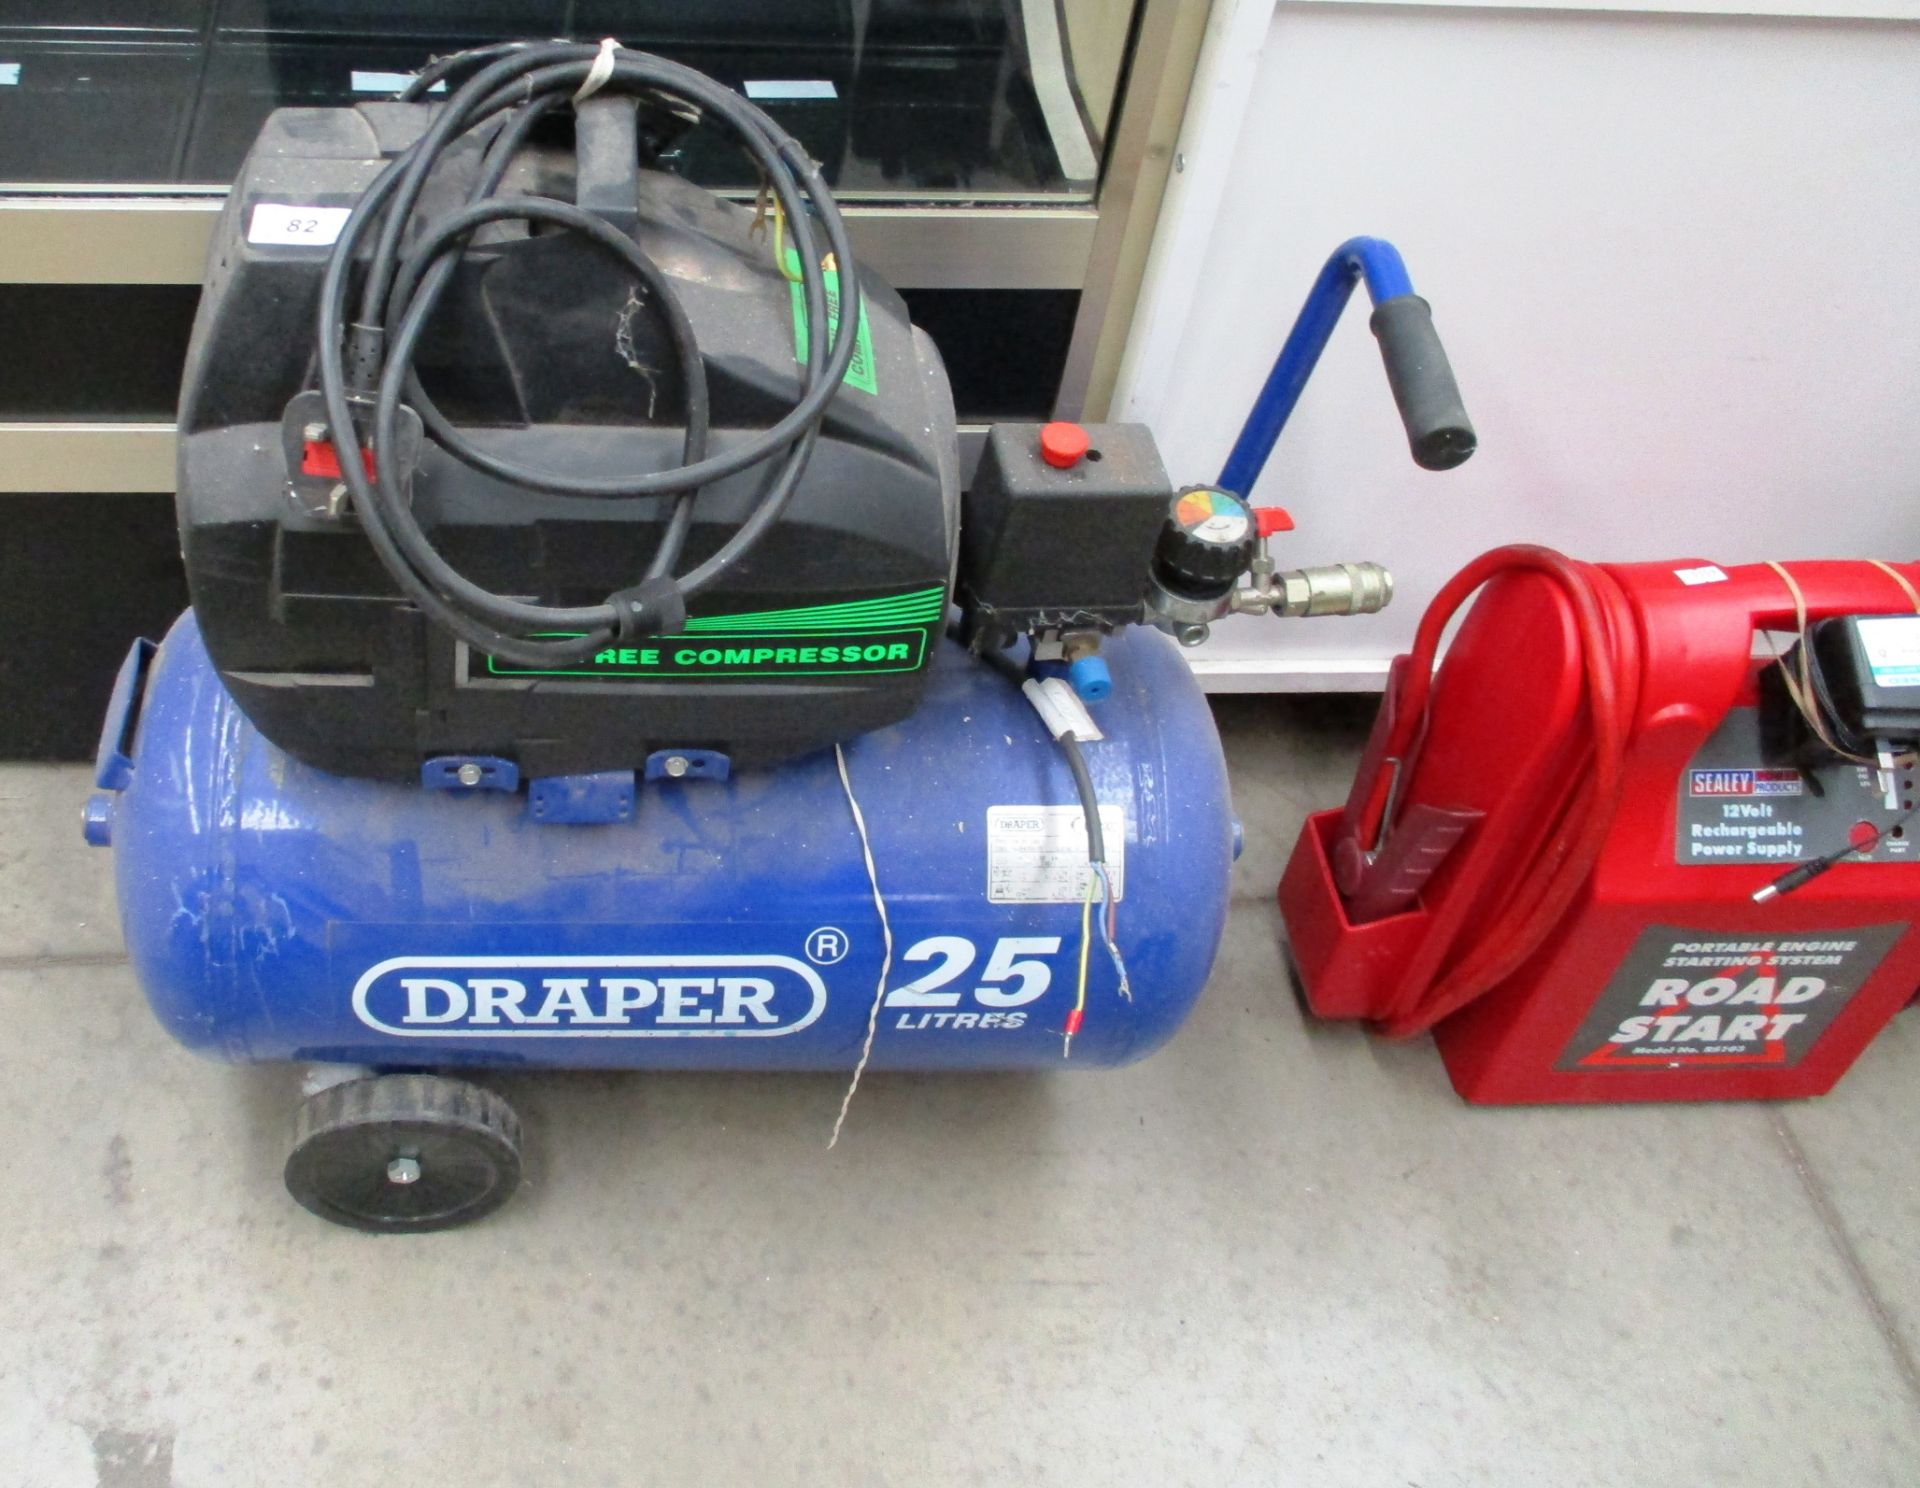 A Draper 25litre portable compressor - sold as seen and not tested (wiring disconnected)